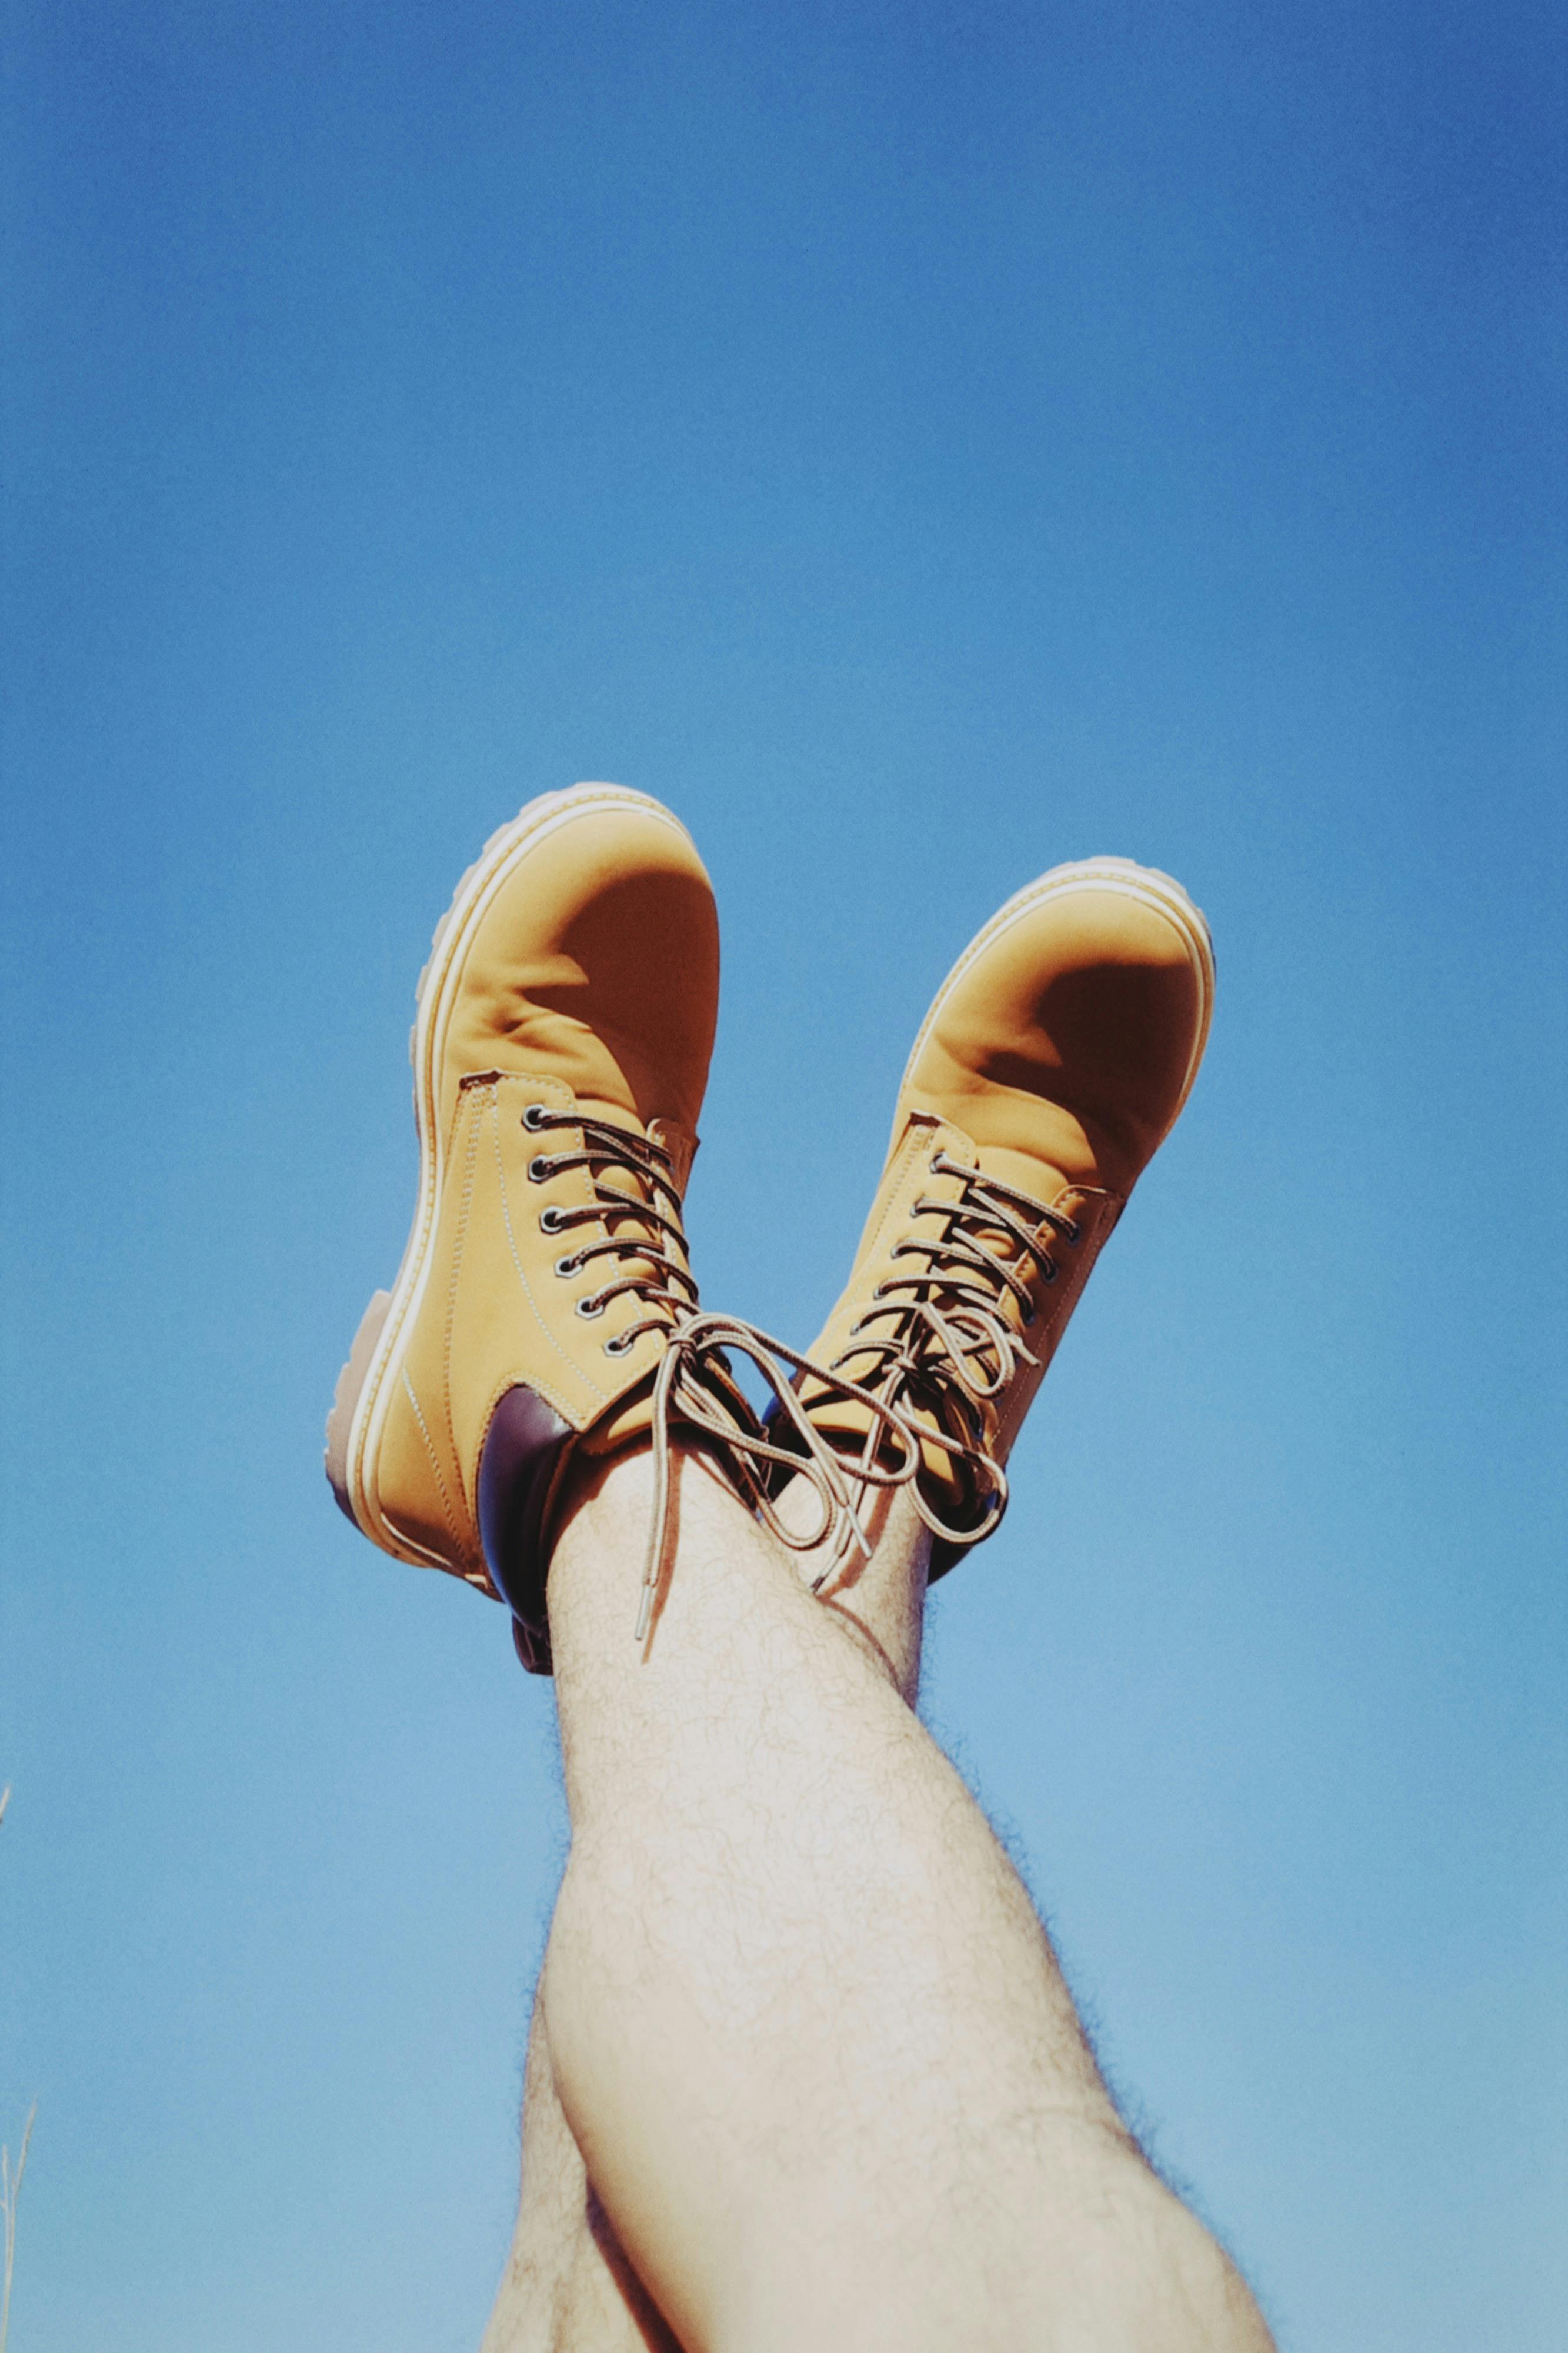 Trappers on Feet · Free Stock Photo